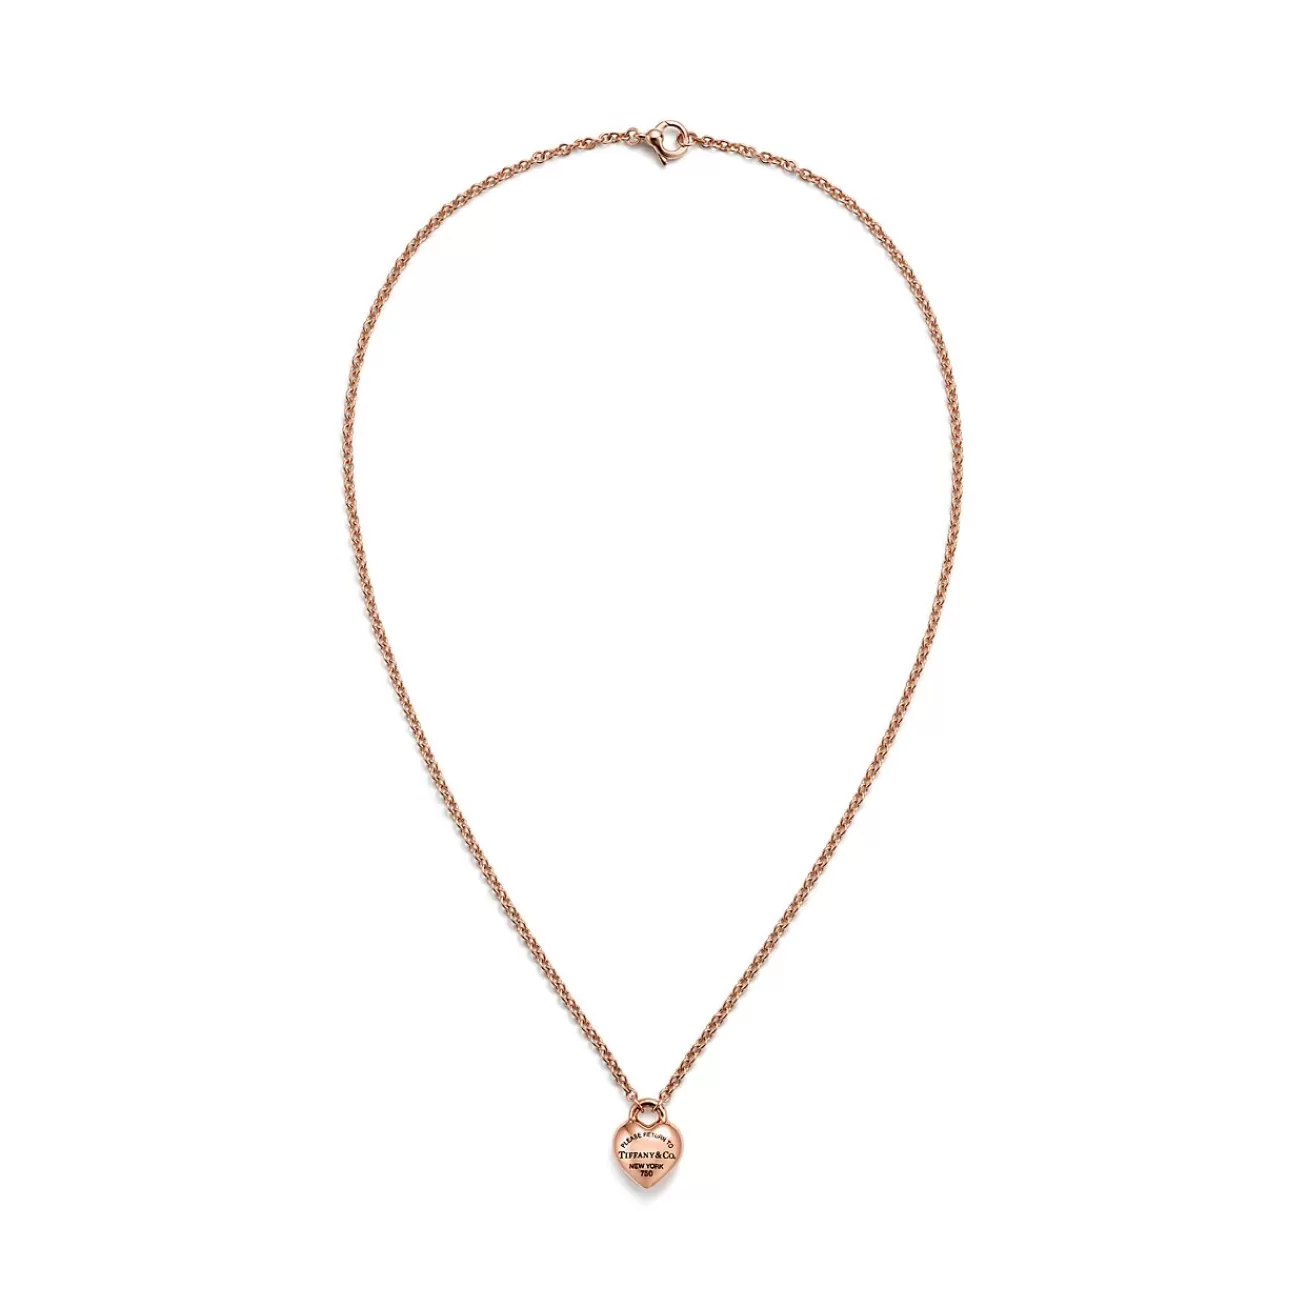 Tiffany & Co. Return to Tiffany® Full Heart Pendant in Rose Gold | ^ Necklaces & Pendants | New Jewelry